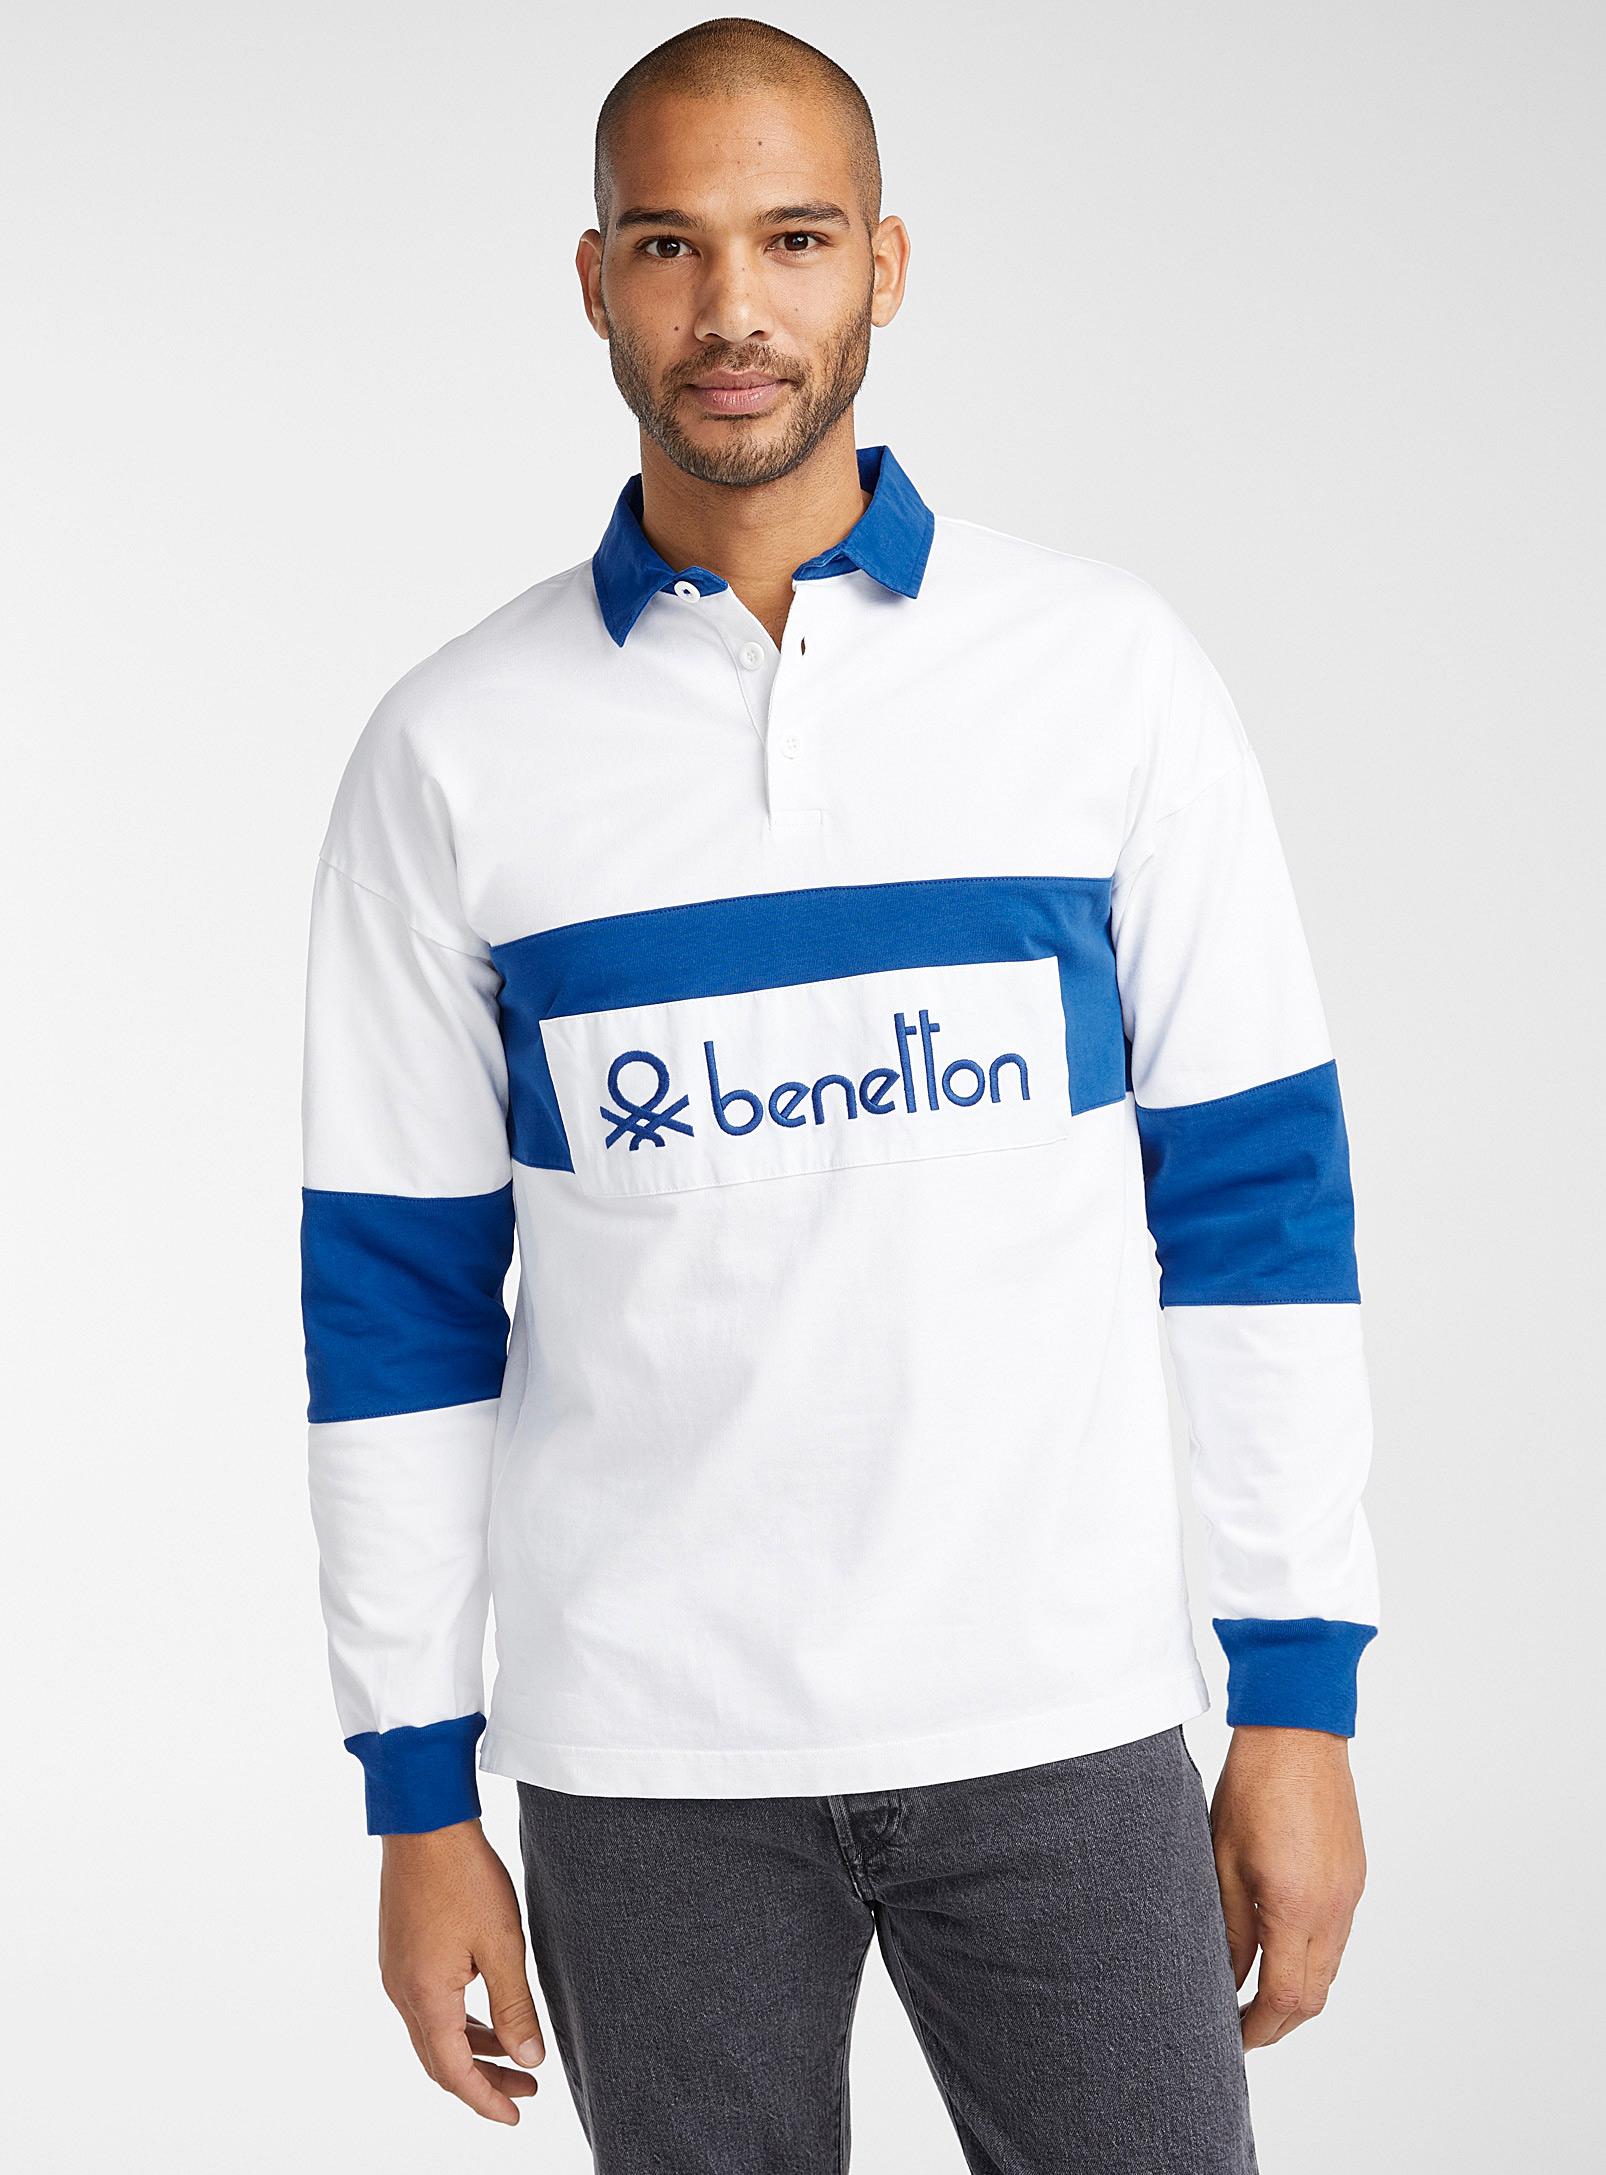 Benetton Rugby Shirt Vintage - United Colors Of Benetton striped rugby ...